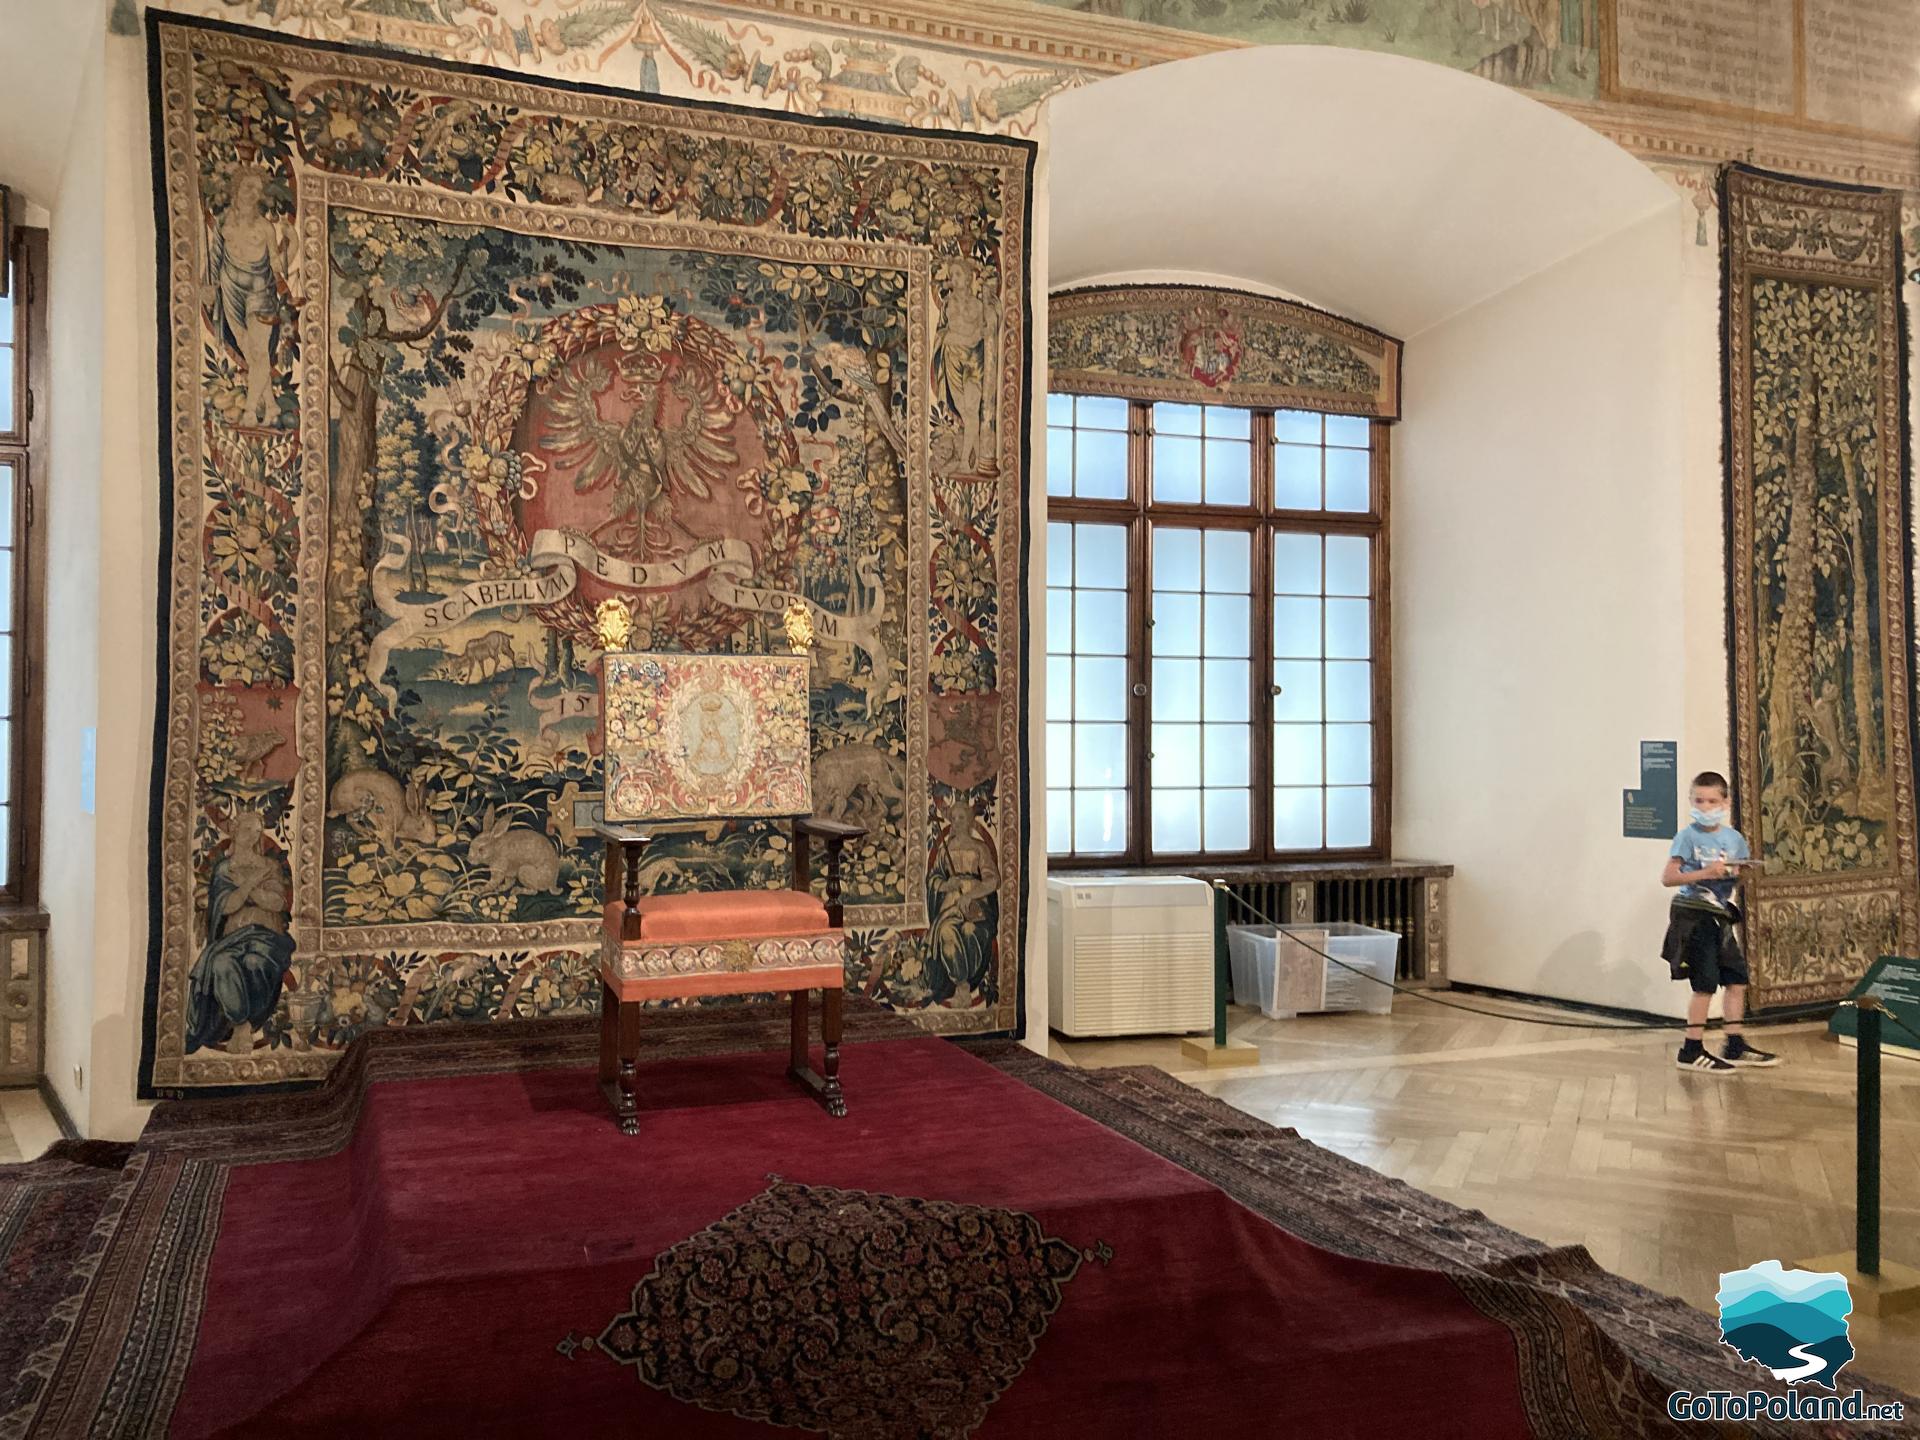 the boy is standing in the chamber, there are large windows, in the middle there is a throne chair and a tapestry is hung behind the chair